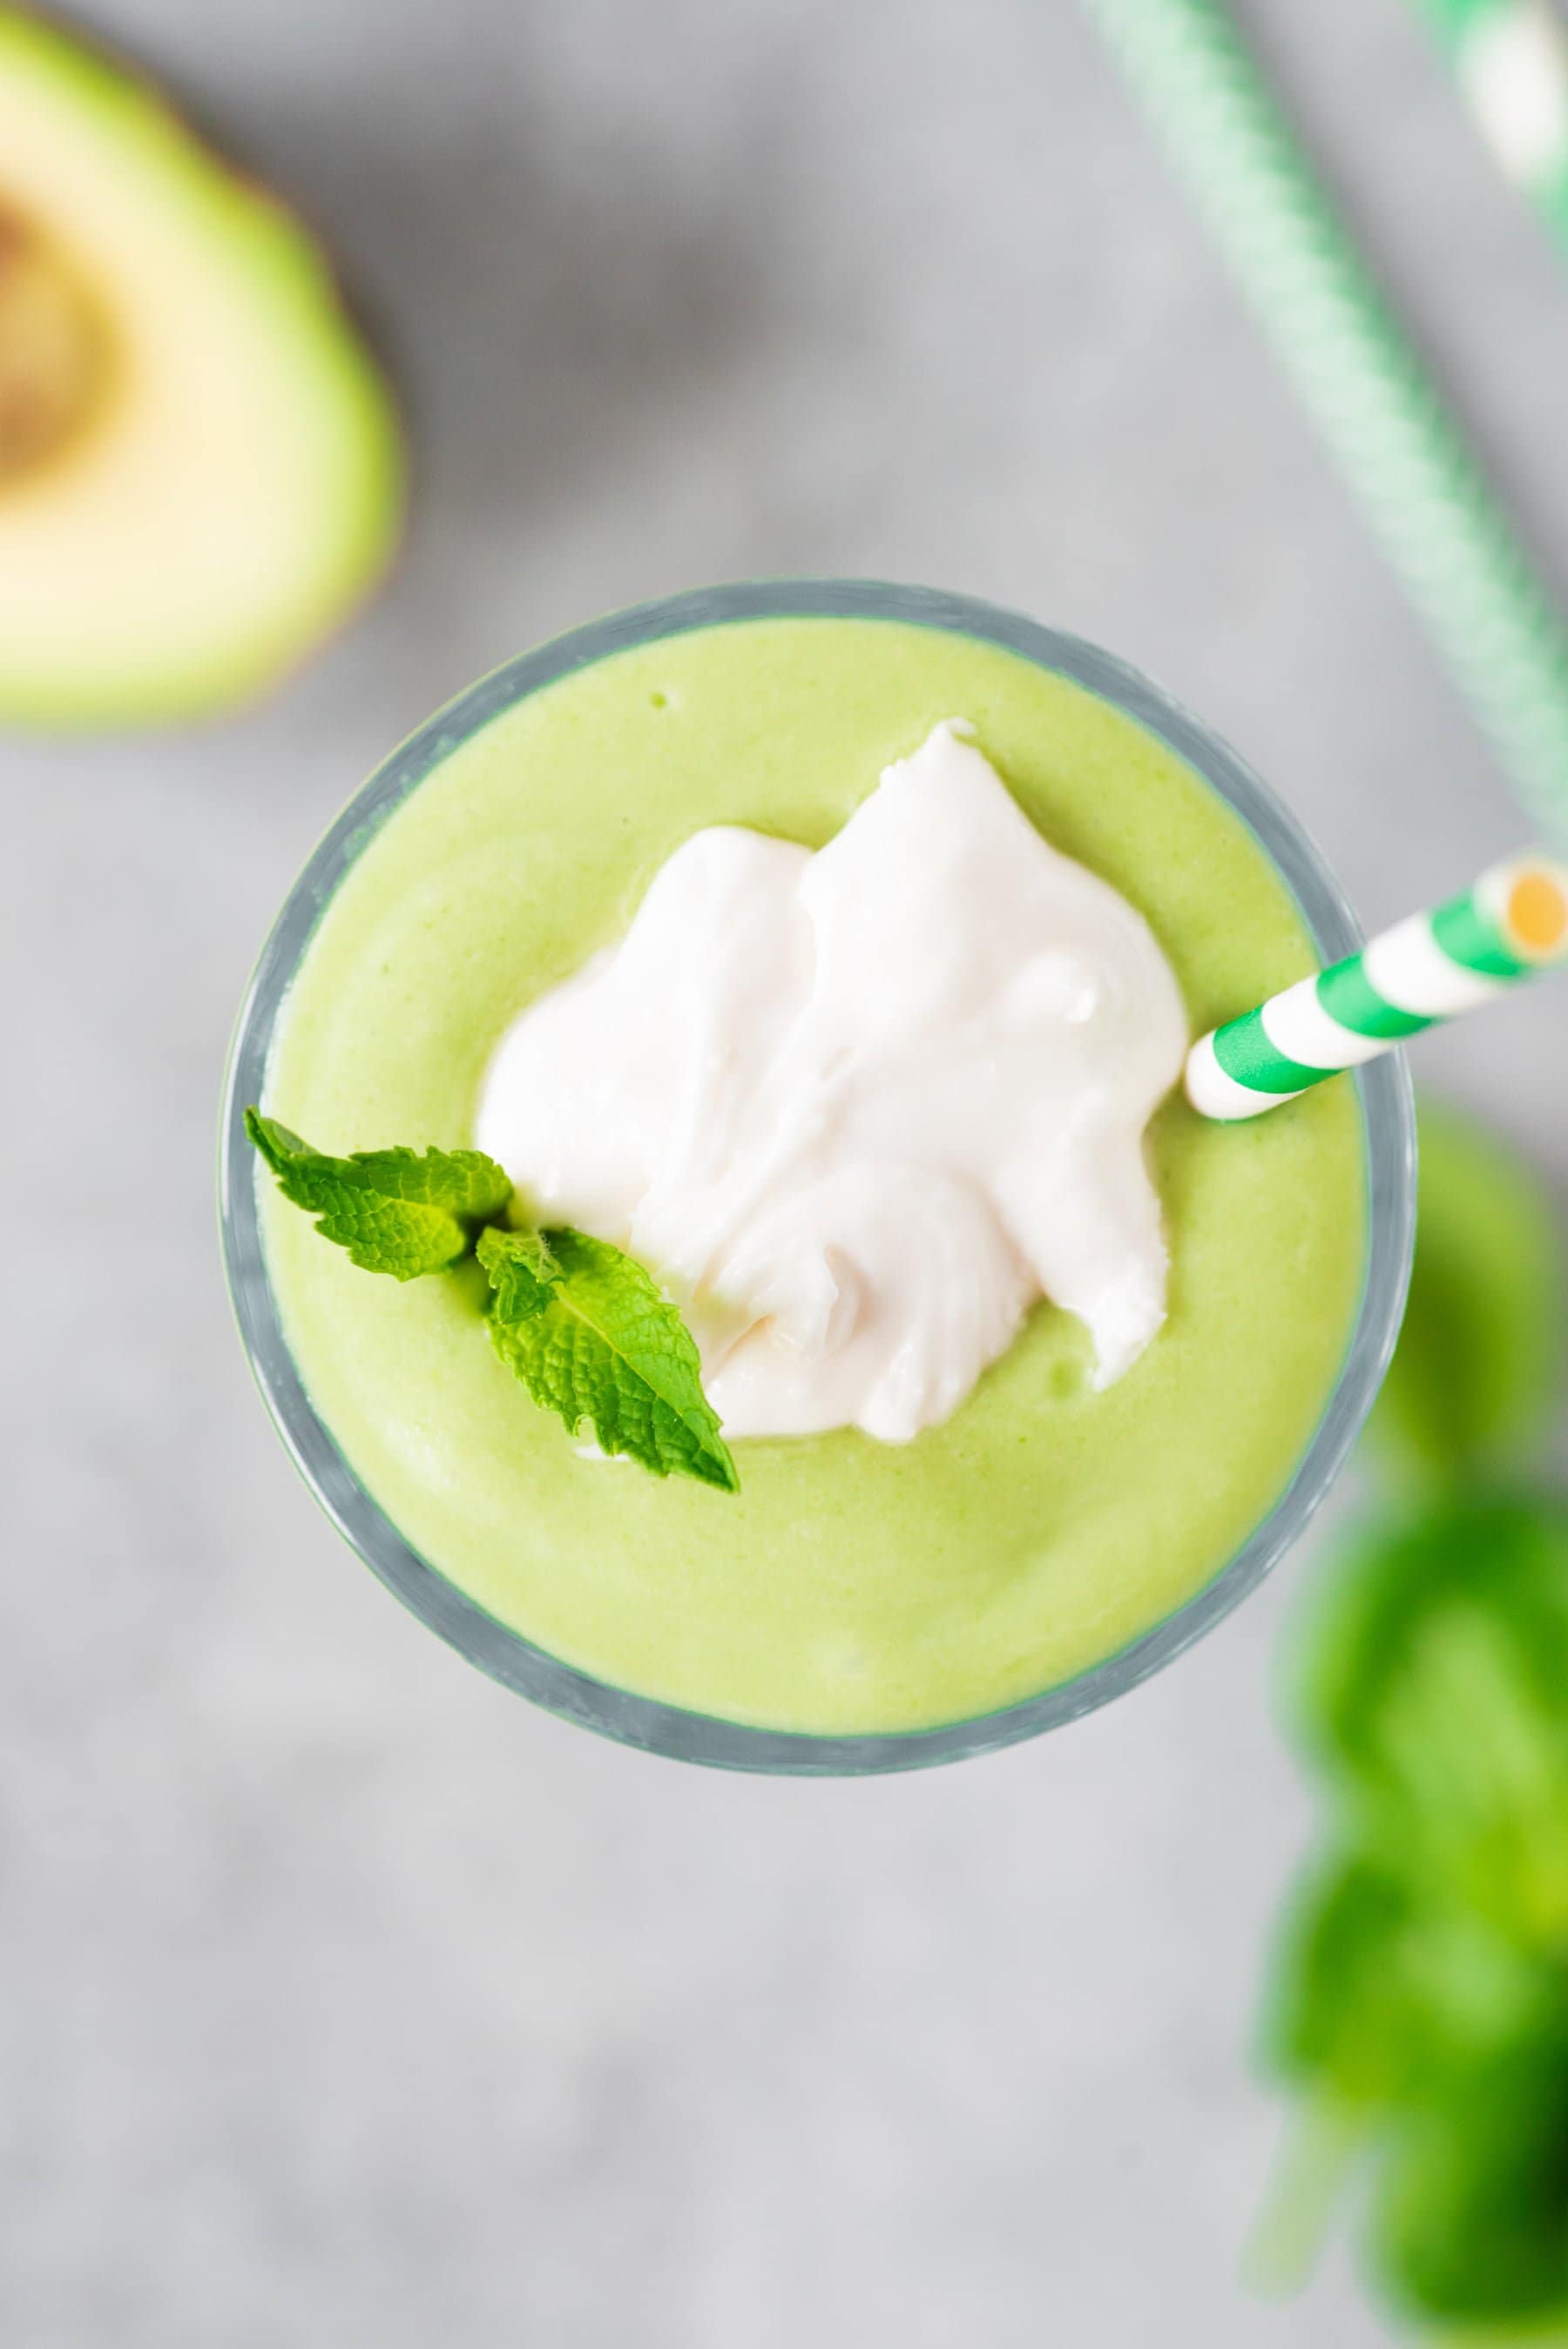 A creamy avocado banana smoothie garnished with coconut whipped cream, fresh mint leaves, and a striped straw.